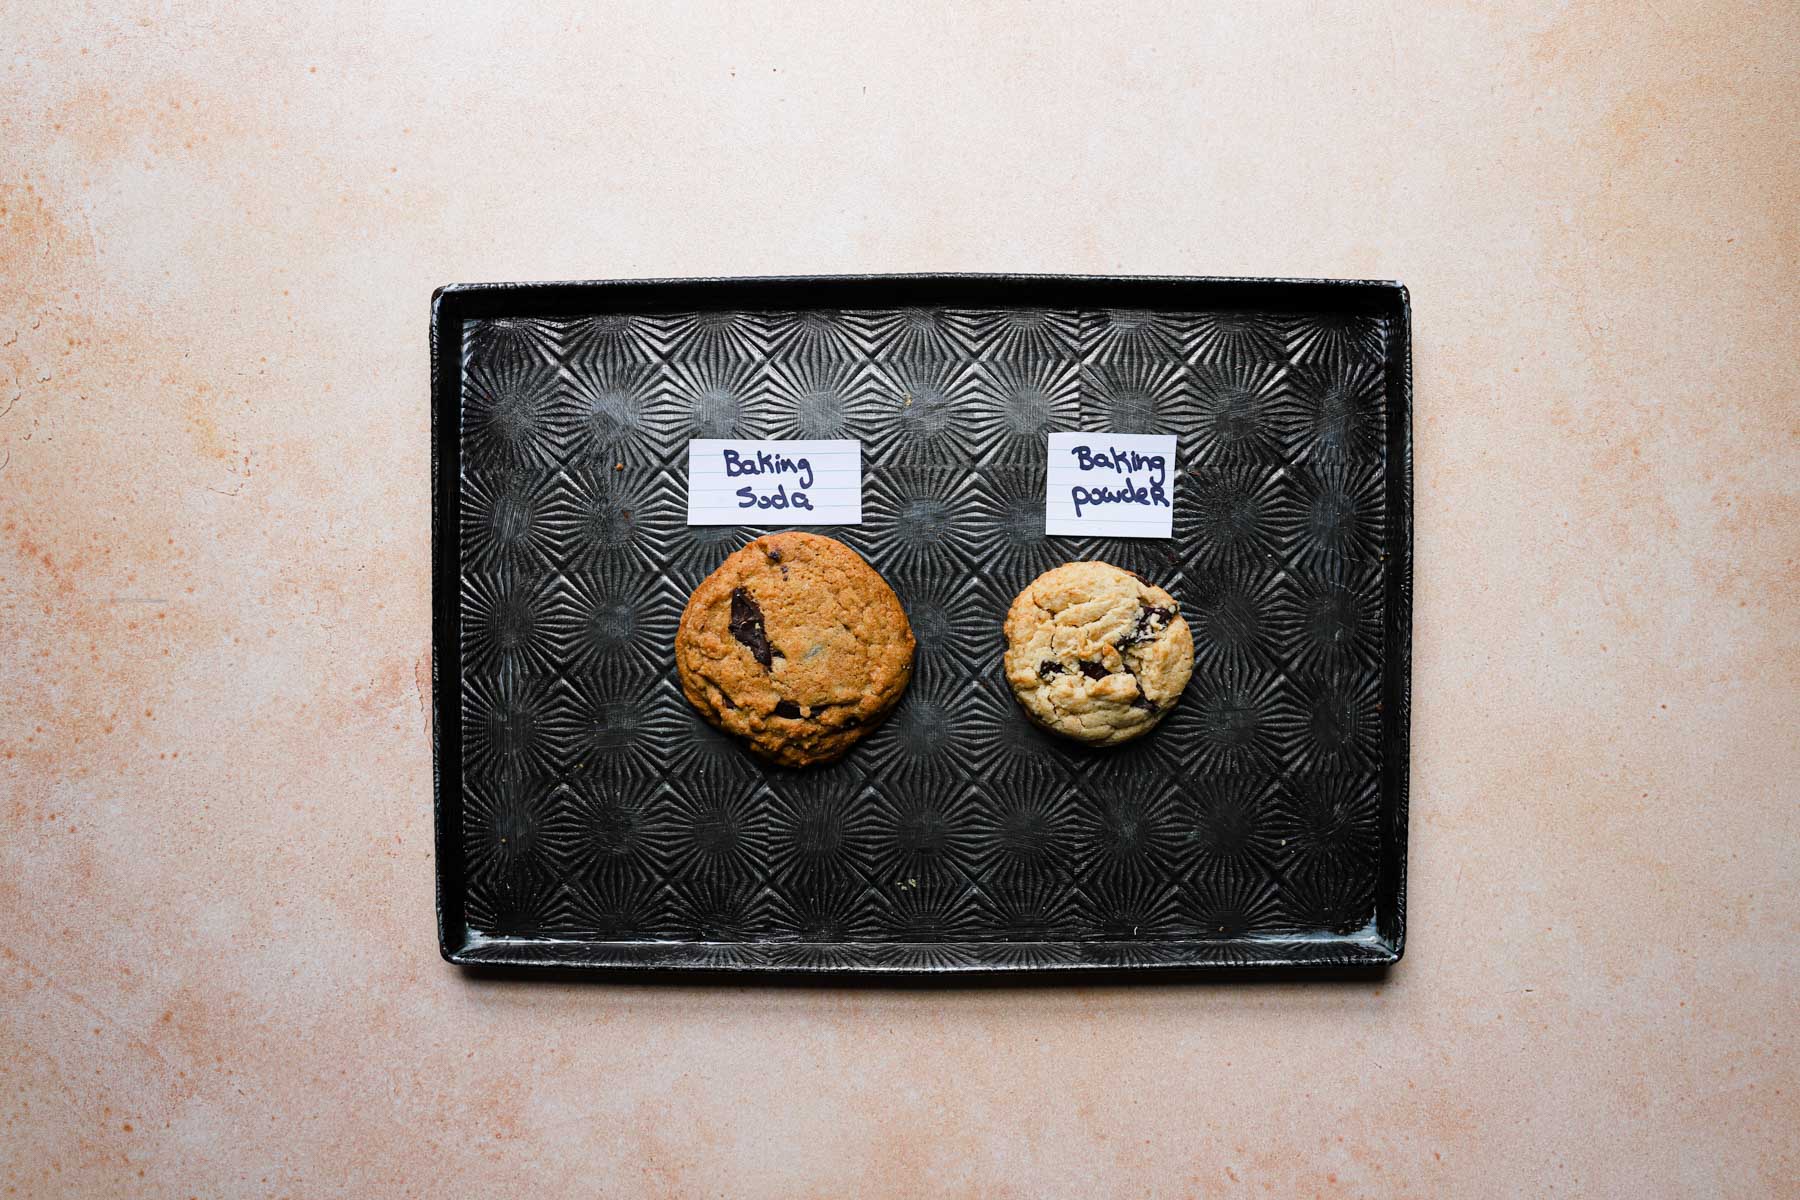 Two cookies on a tray.